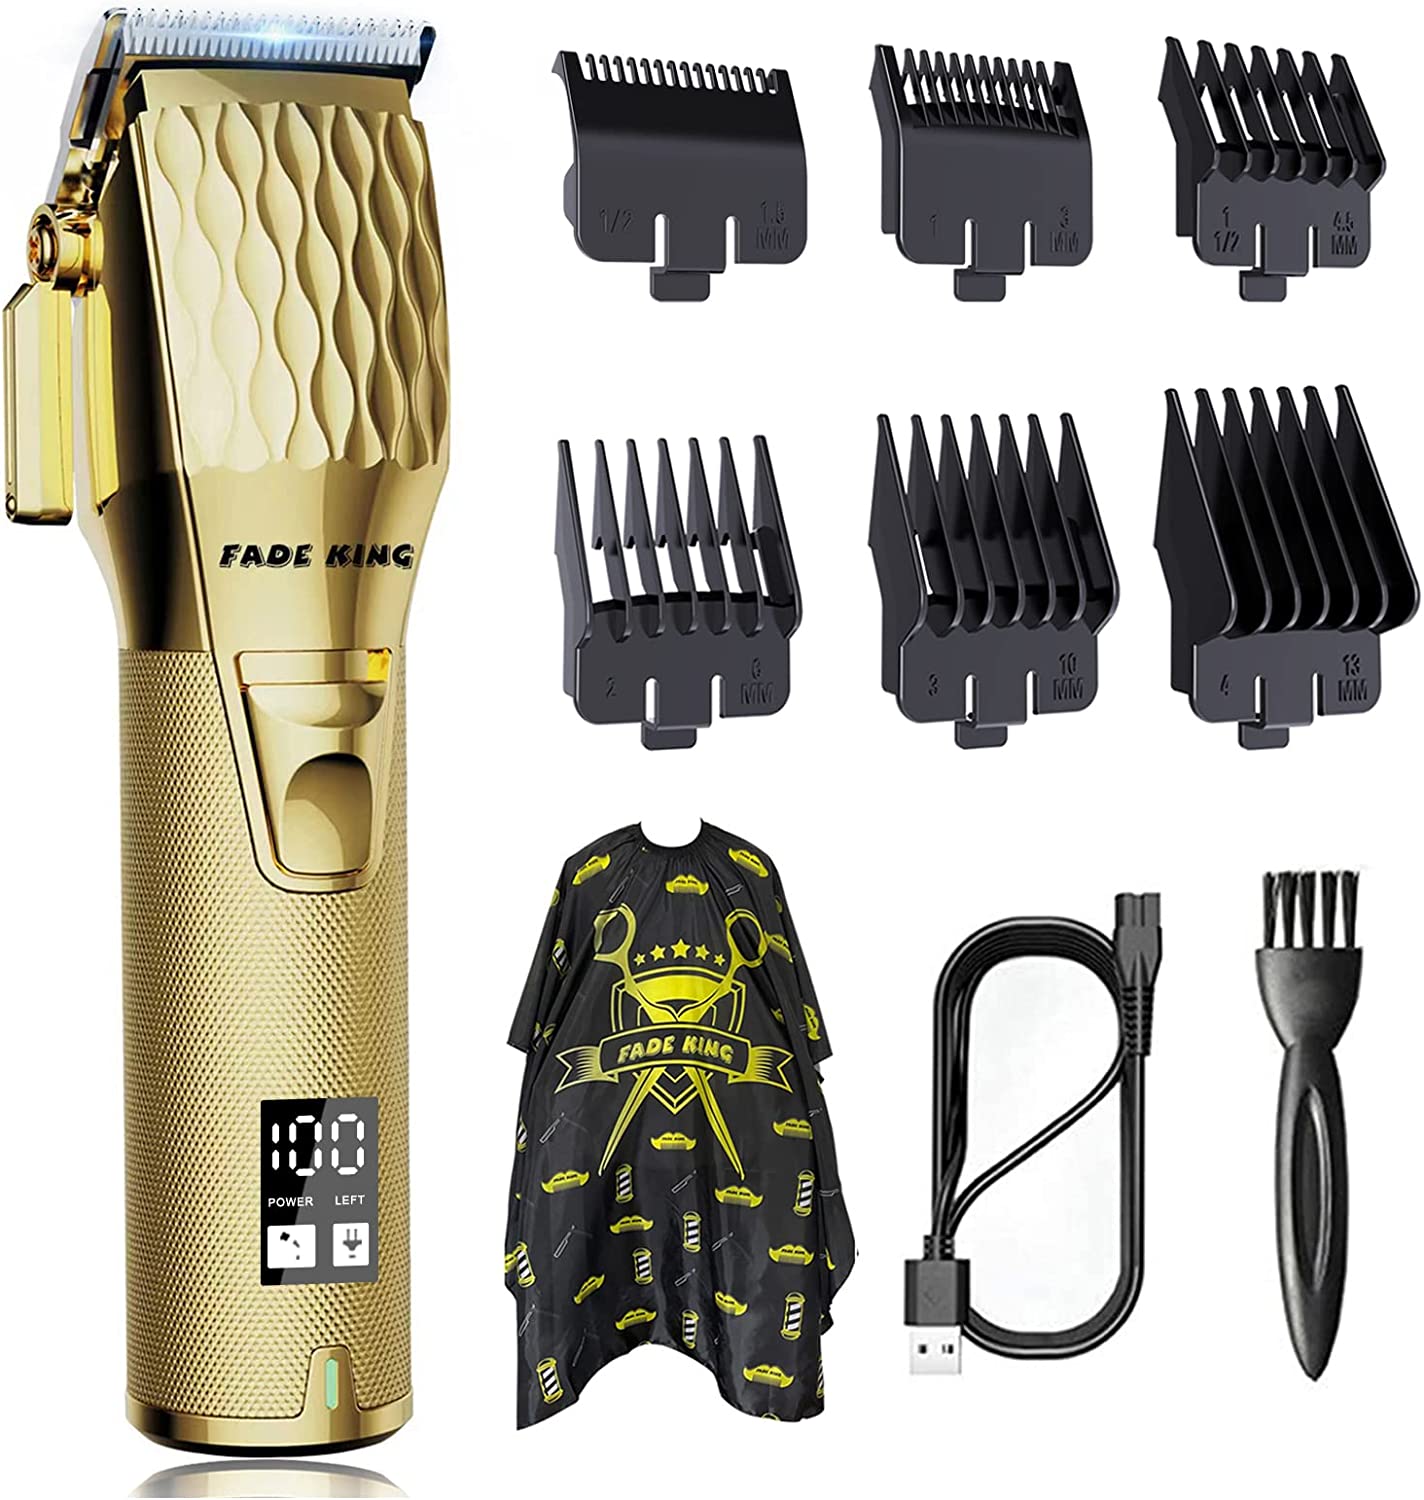 FADEKING Professional Hair Clippers for Men - Cordless Barber Clippers for Hair Cutting, Rechargeable Hair Beard Trimmer with LED Display & Quality Travel Storage Case (Silver Black)